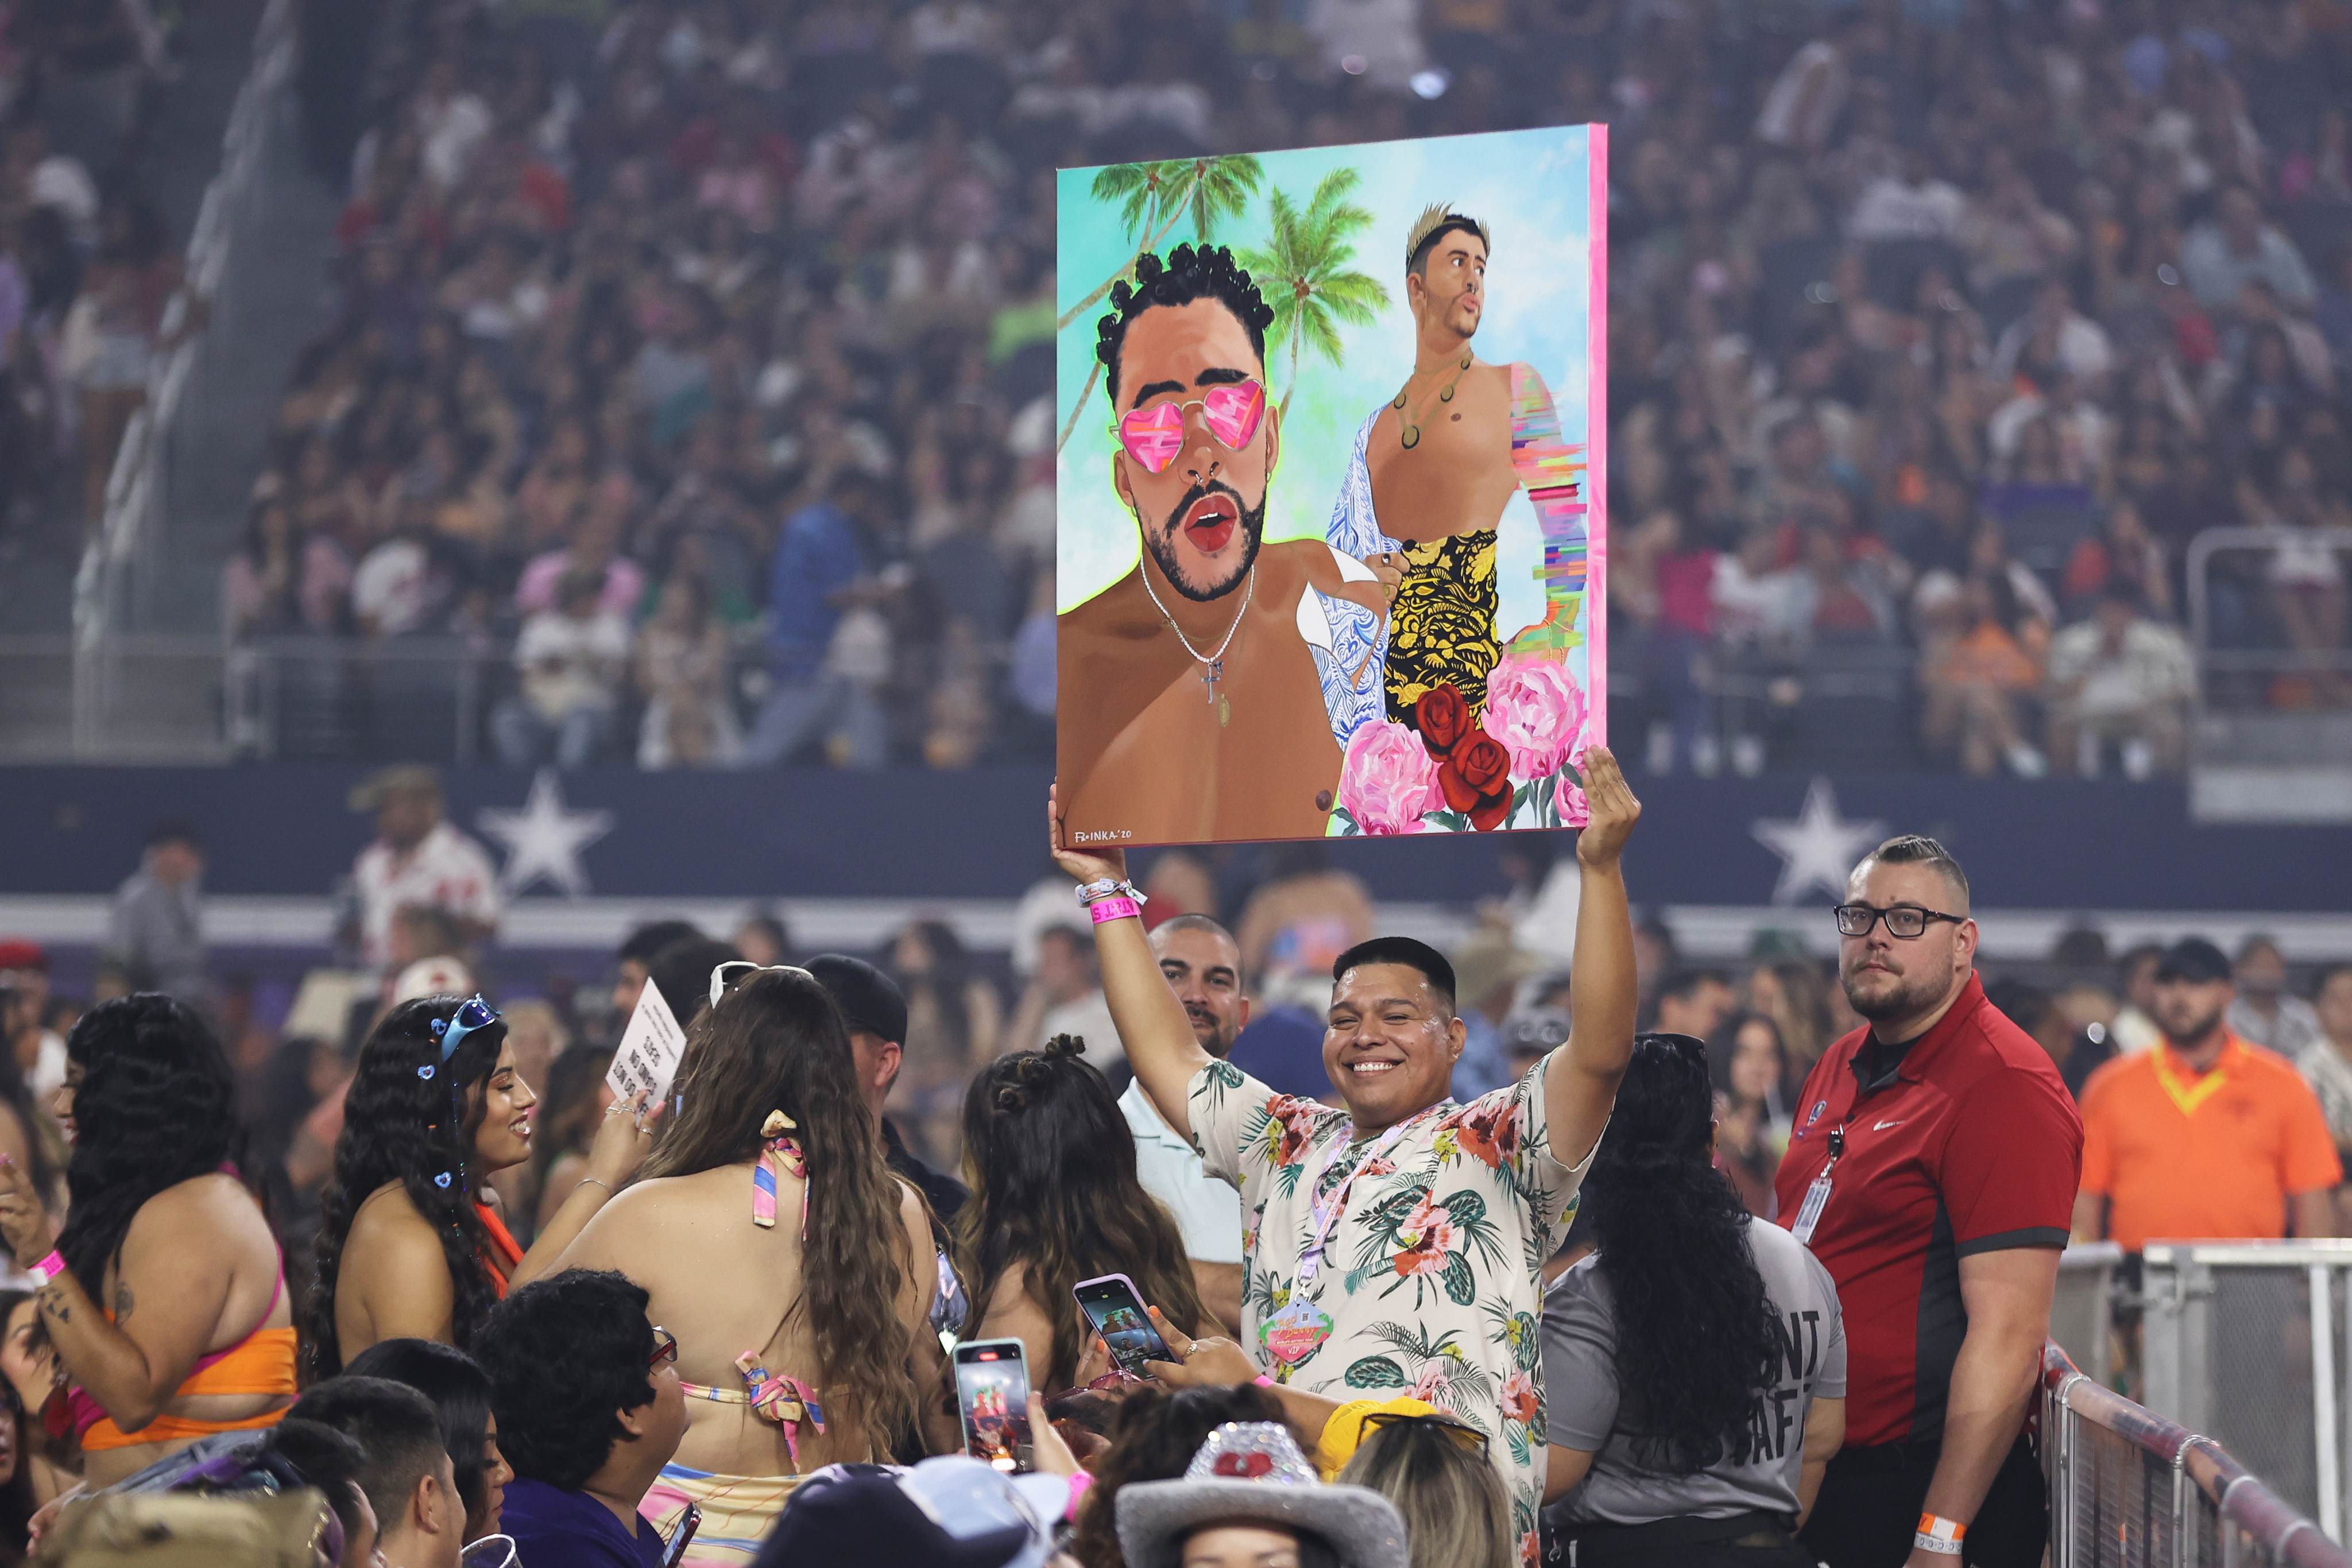 Fans at Bad Bunny's concert came dressed as boldly as their fave